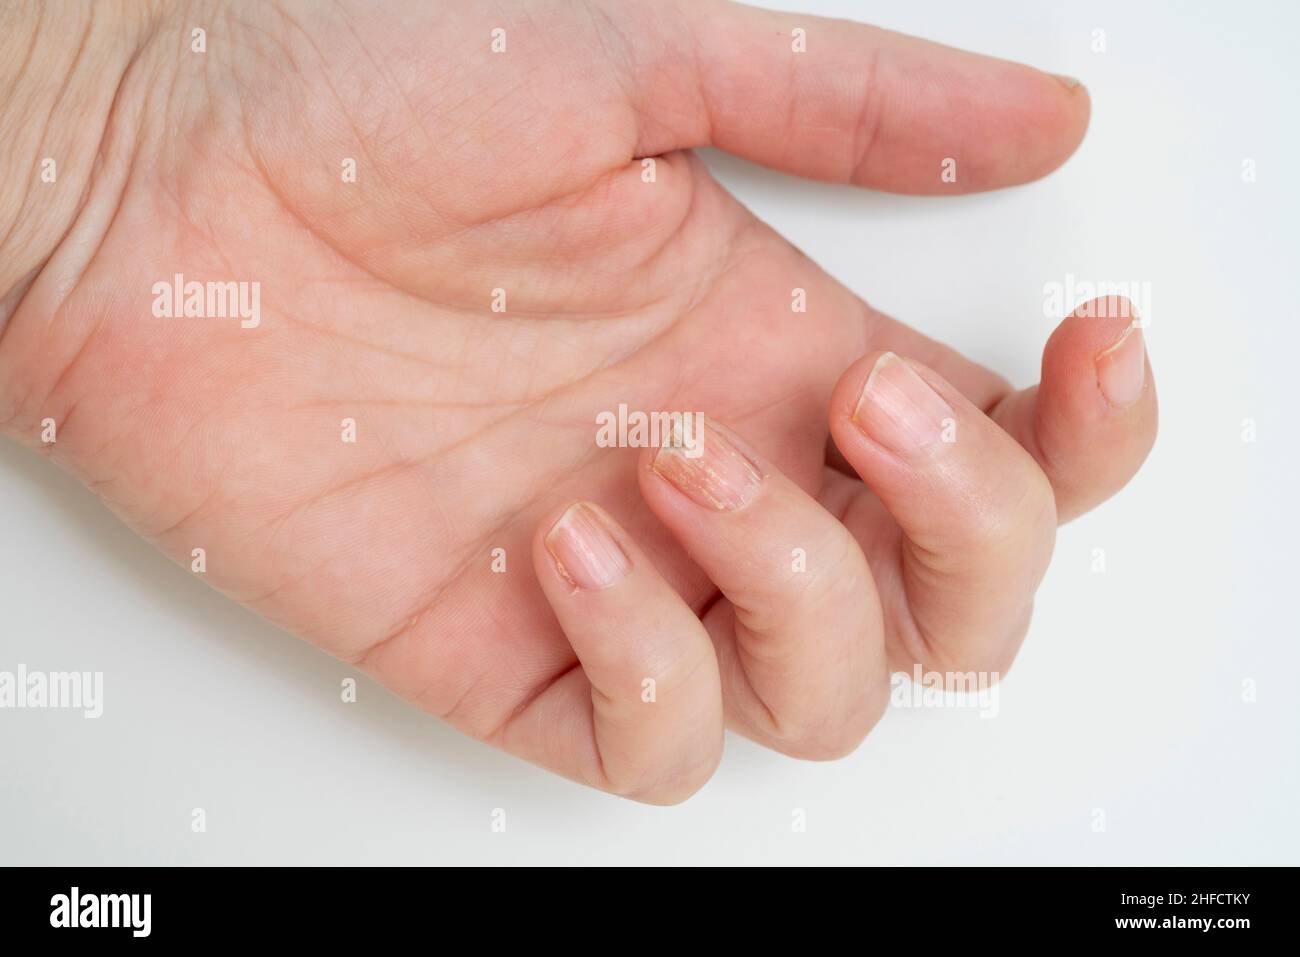 Nail Fungus Hands Disease Fungal Infection Nails Hands Finger Onychomycosis  Stock Photo by ©leravalera89 536396270